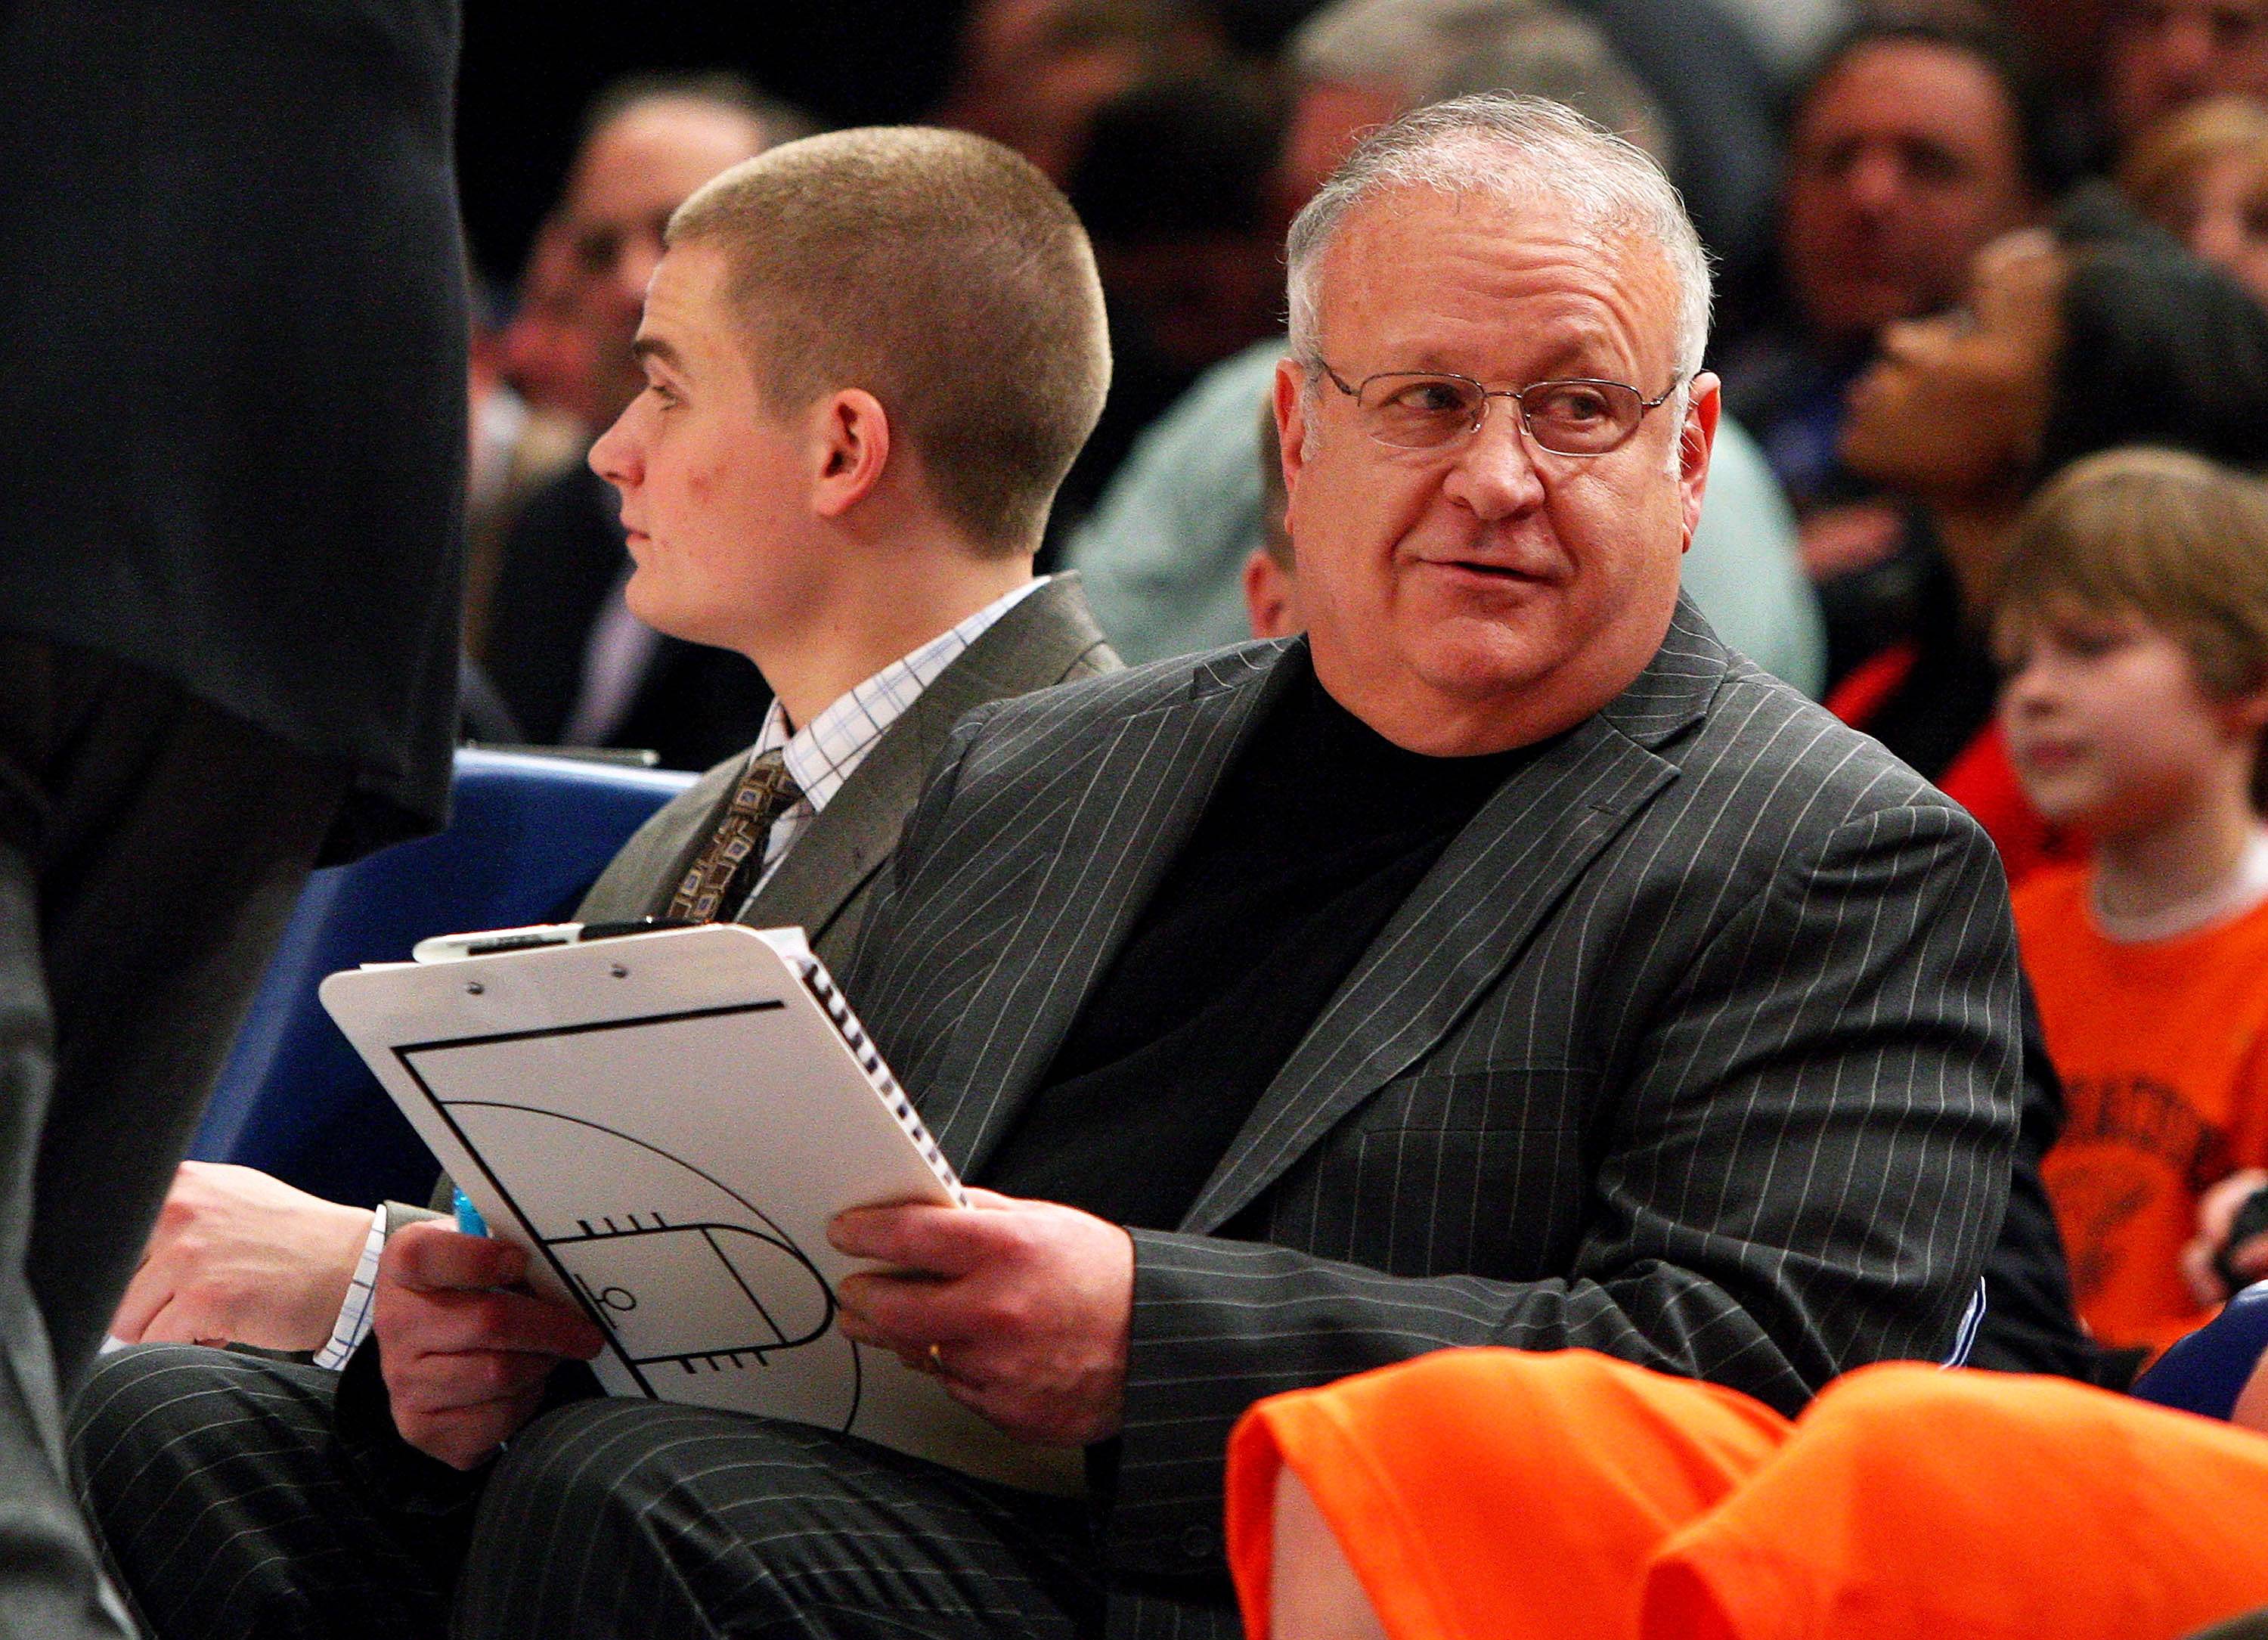 Syracuse Basketball Coach Investigated for Child Molestation - Bernie Fine, the longtime associate head basketball coach at Syracuse University, was put on administrative leave on Nov. 17 after police launched an investigation into claims that he sexually molested the team’s ball boy in the 1980s and 1990s. The shocking allegations came two weeks after those of former Penn State assistant football coach Jerry Sandusky, who is accused of raping eight boys during a 15-year period.  (Photo: Jim McIsaac/Getty Images)